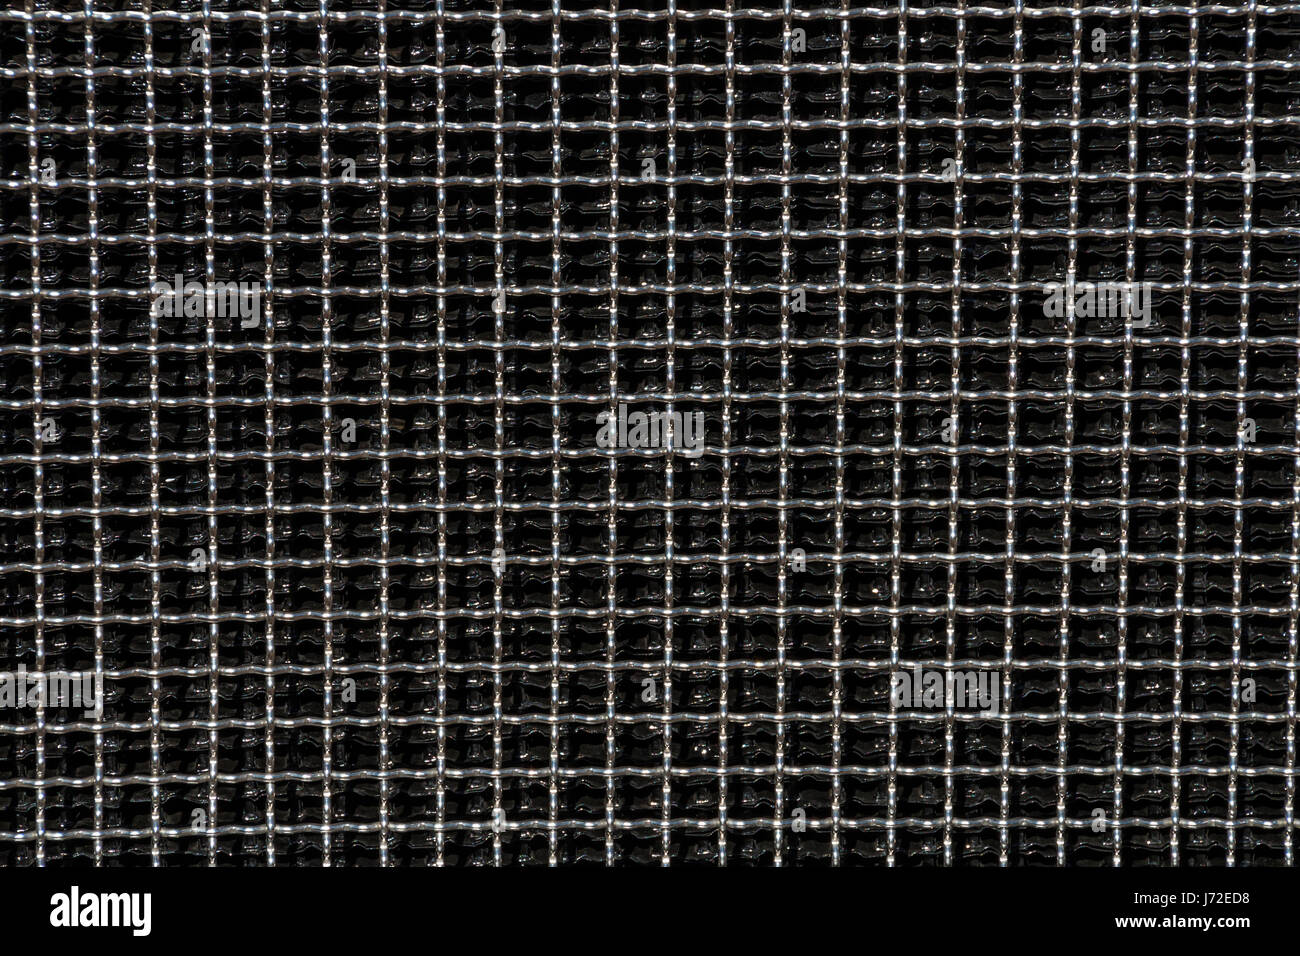 Close up of dark reflective  metal square grid patterns and textures background Stock Photo